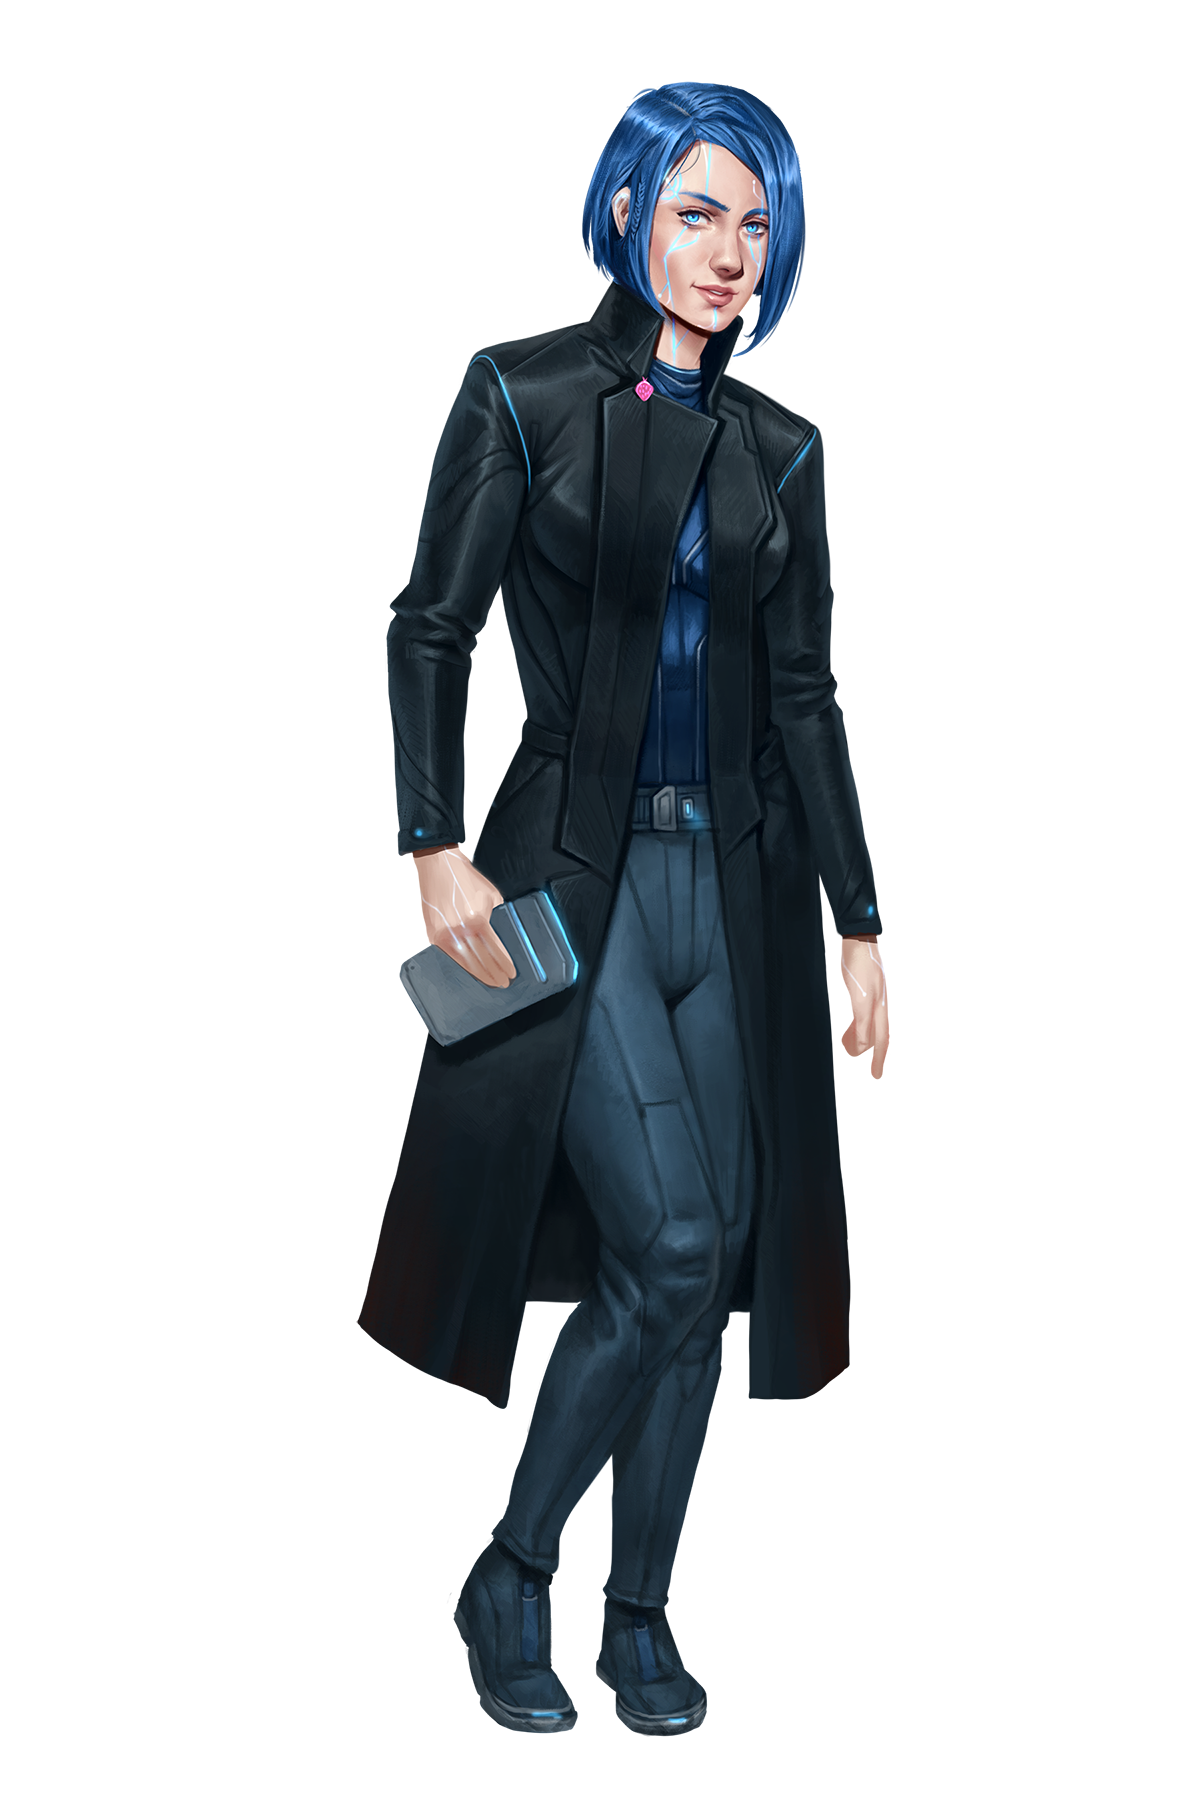 Celita, a blue haired android in a long black jacket holding a datapad
